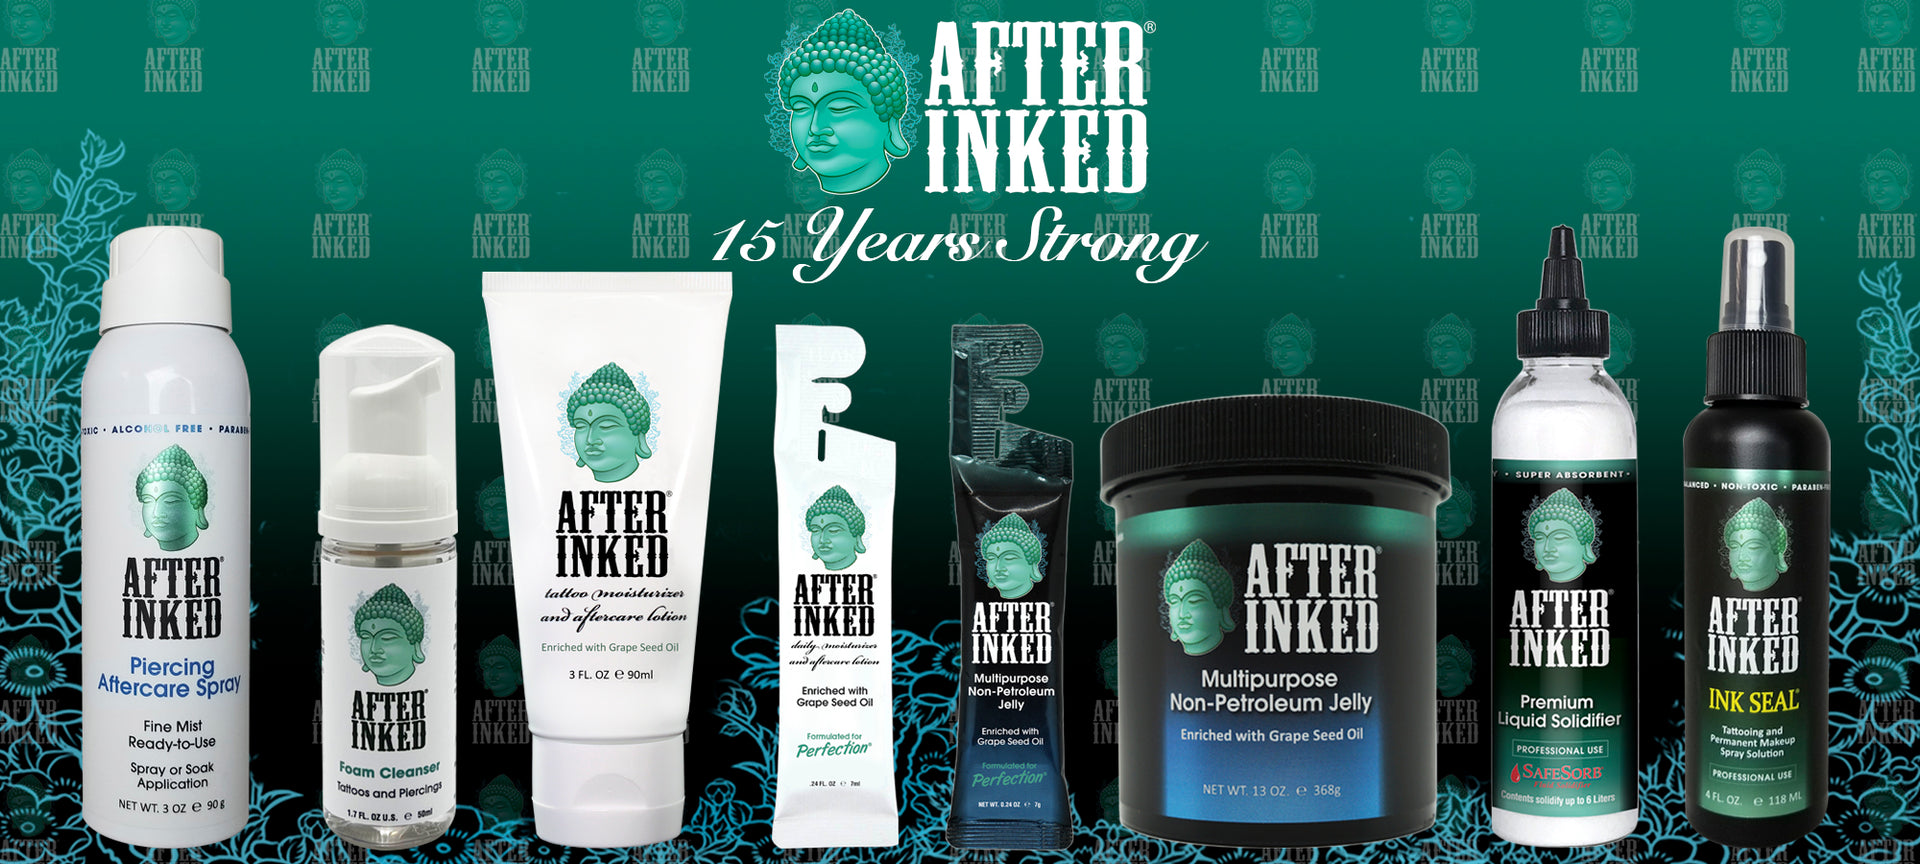 After Inked Tattoo Aftercare, Piercing Aftercare, Makeup